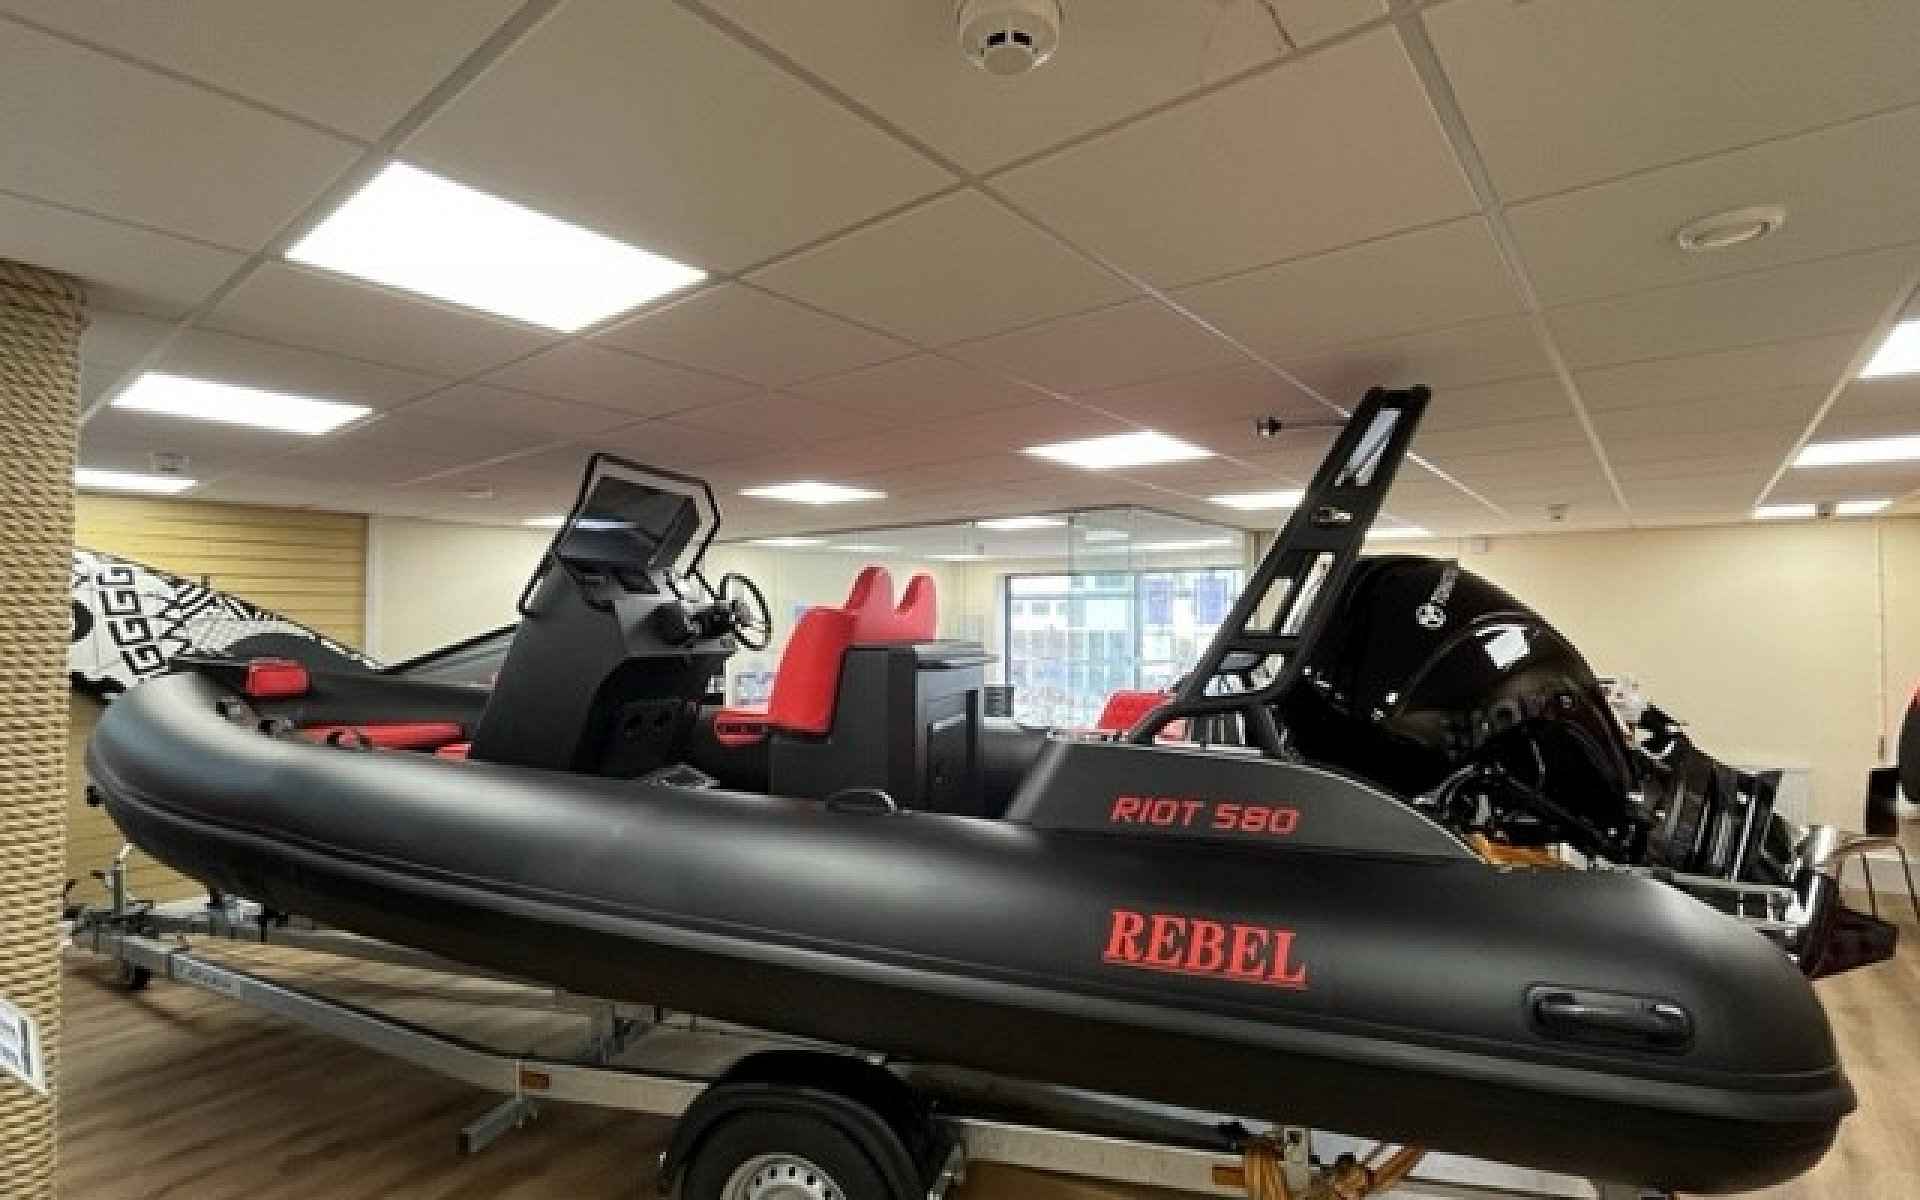 REBEL RIOT 580 RIB (2023) side view boats for sale in North Wales